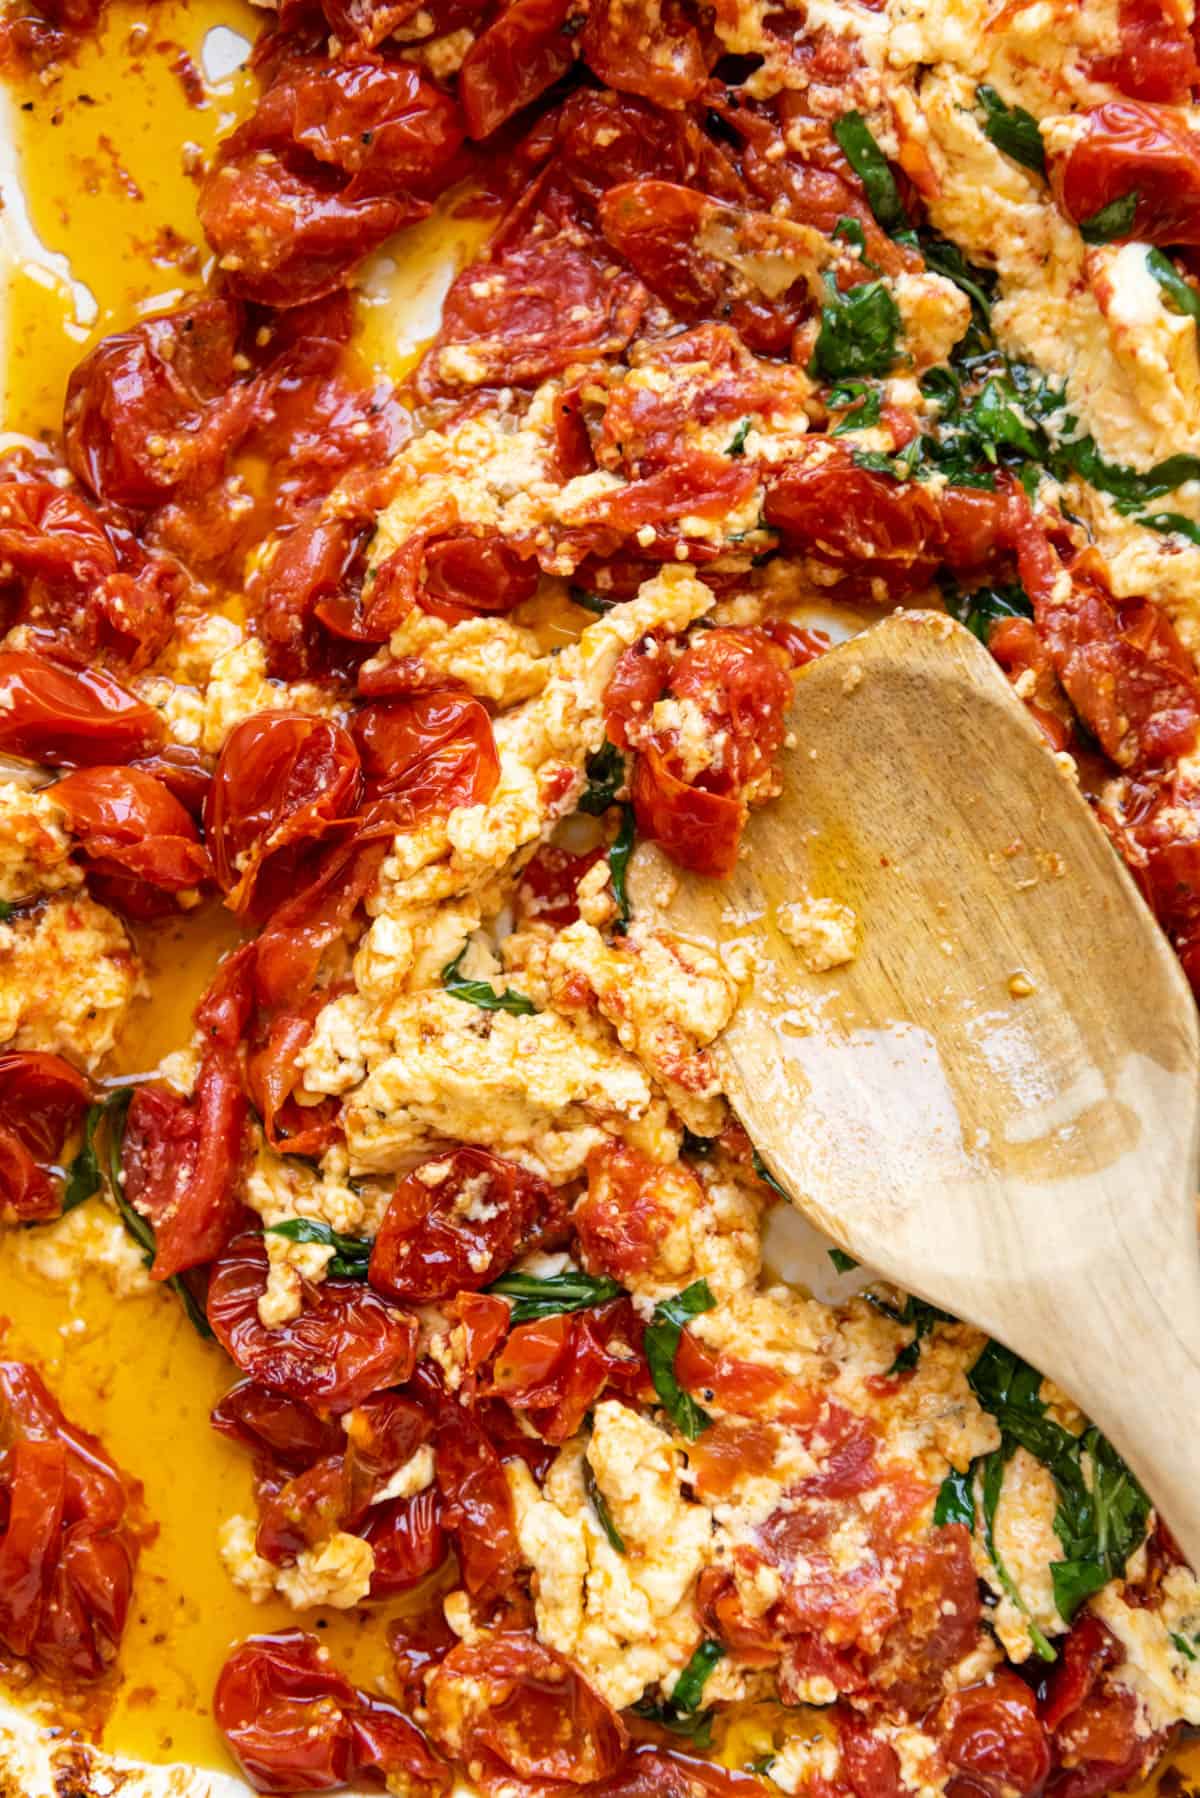 A close image of a wooden spoon mixing together roasted tomatoes and baked feta cheese with olive oil and sliced fresh basil leaves.